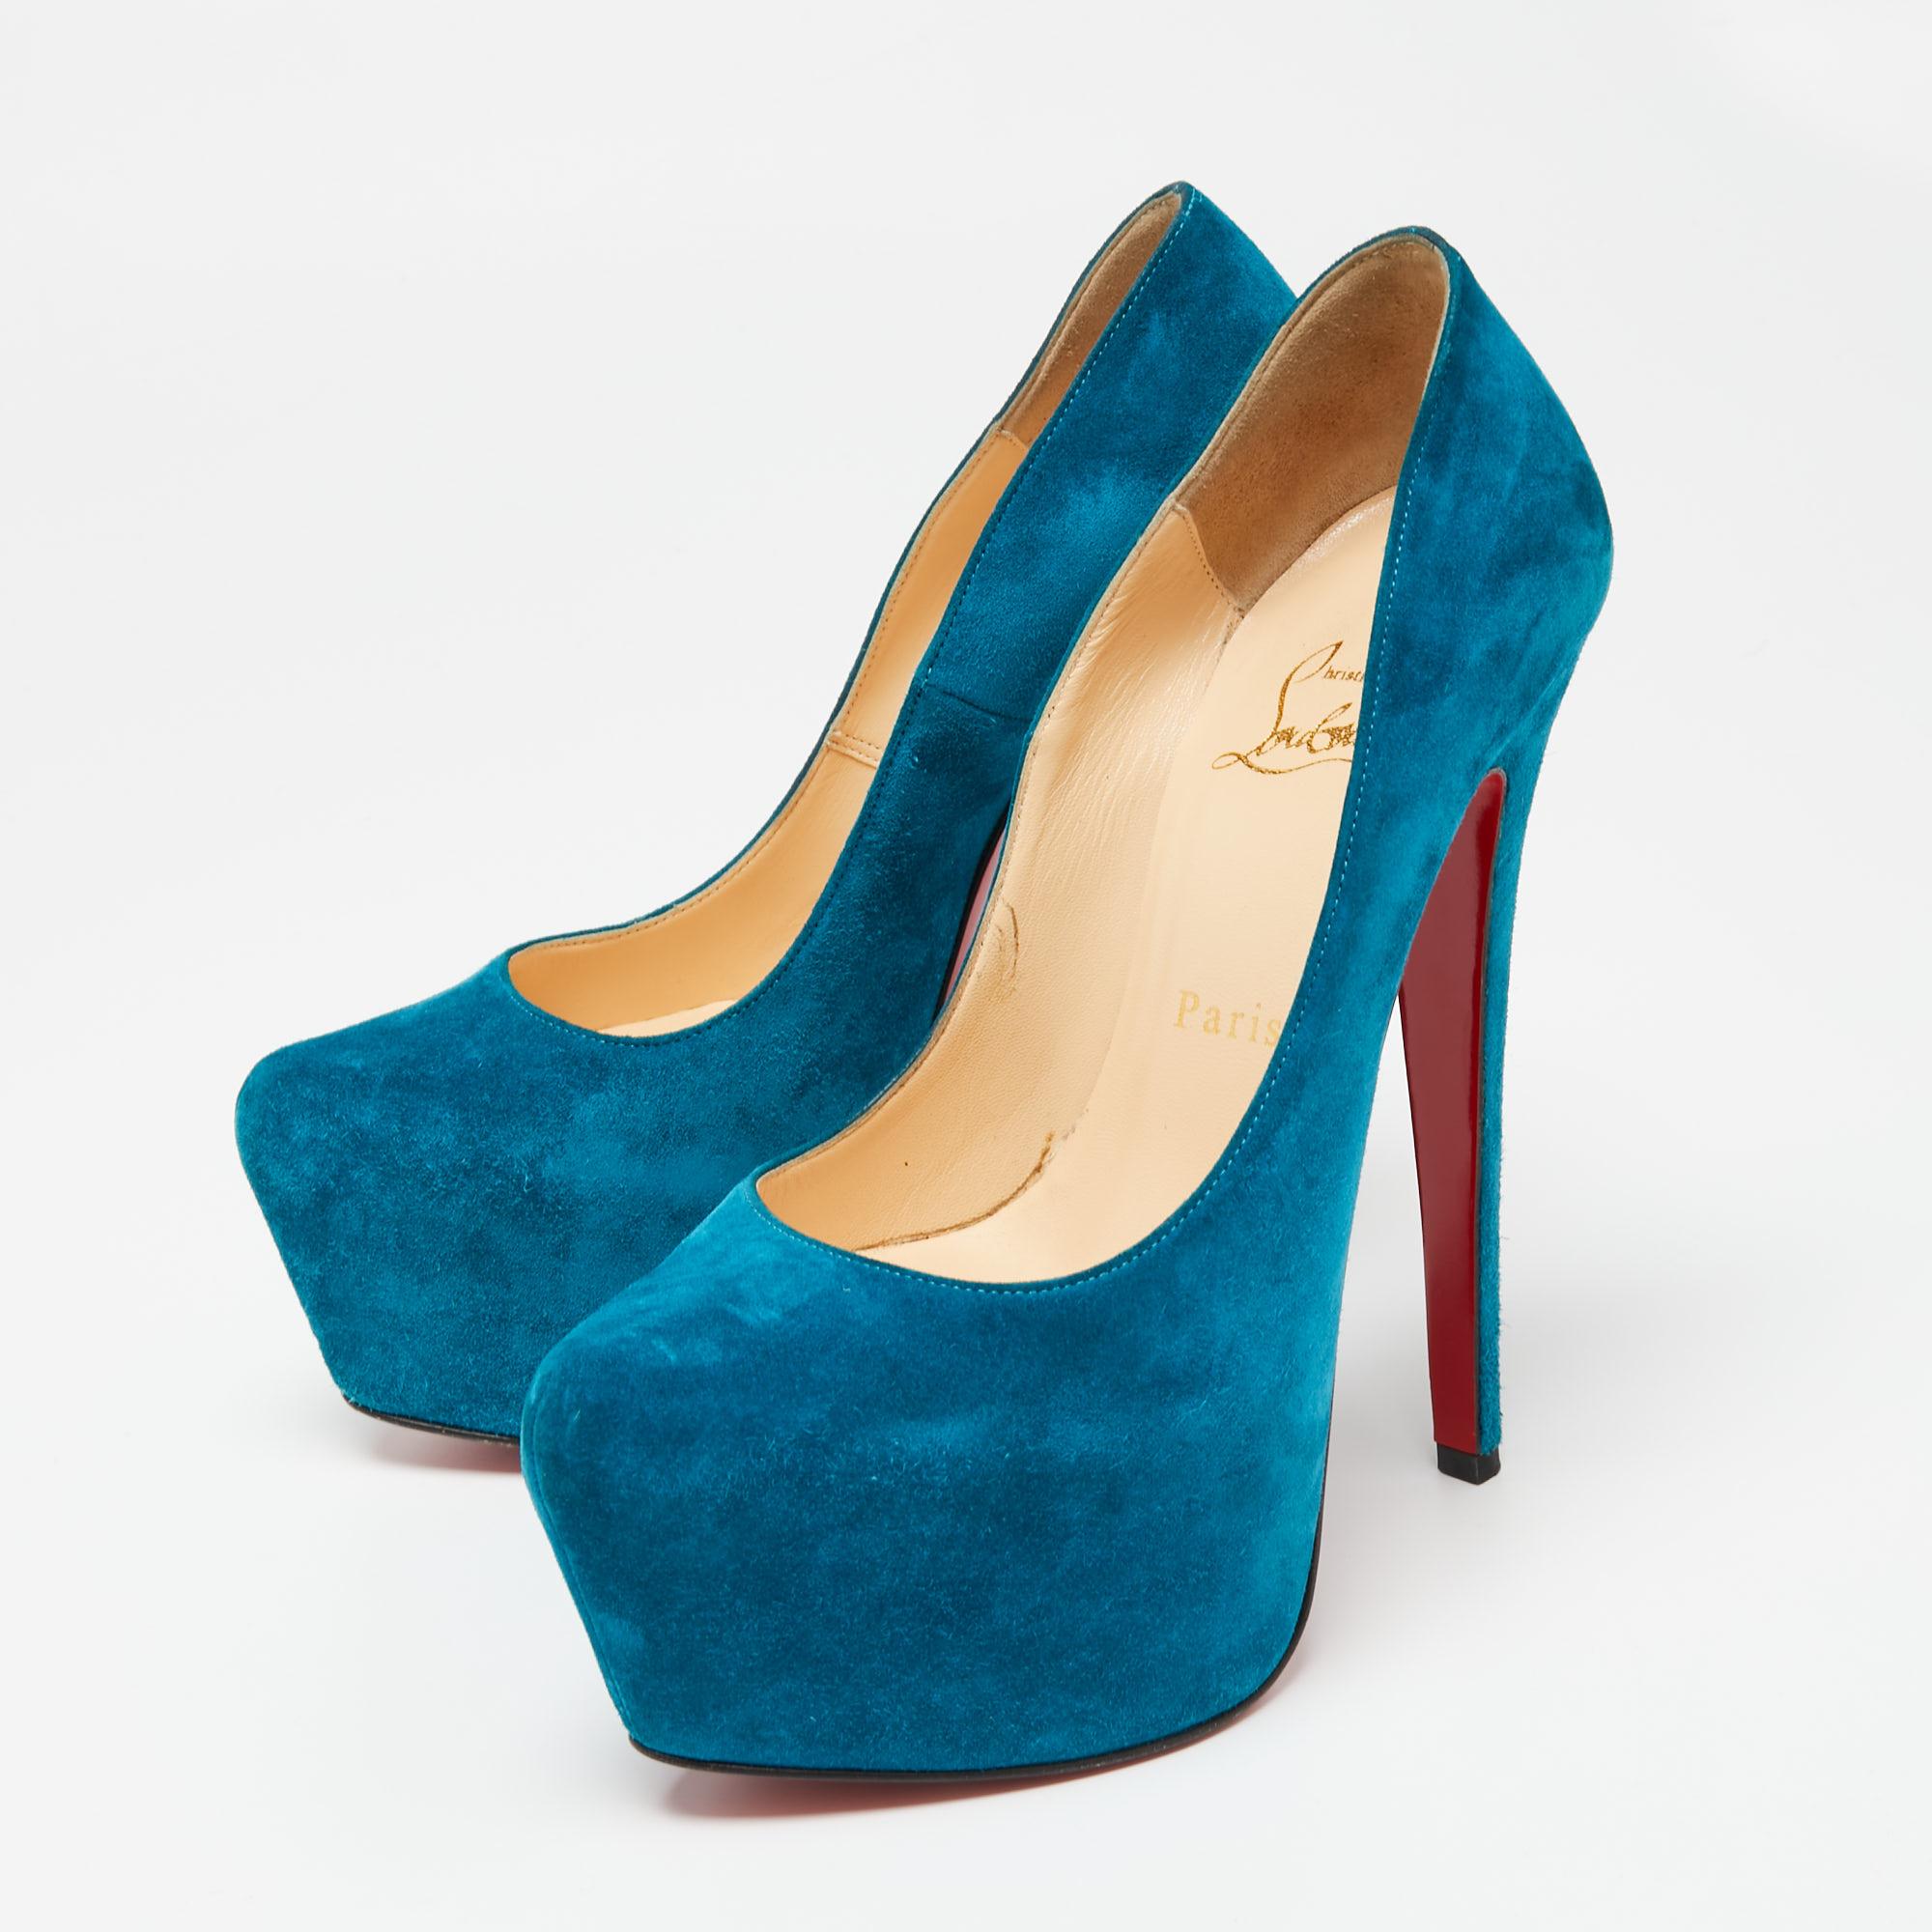 Women's Christian Louboutin Teal Blue Suede Daffodile Platform Pumps Size 36.5 For Sale